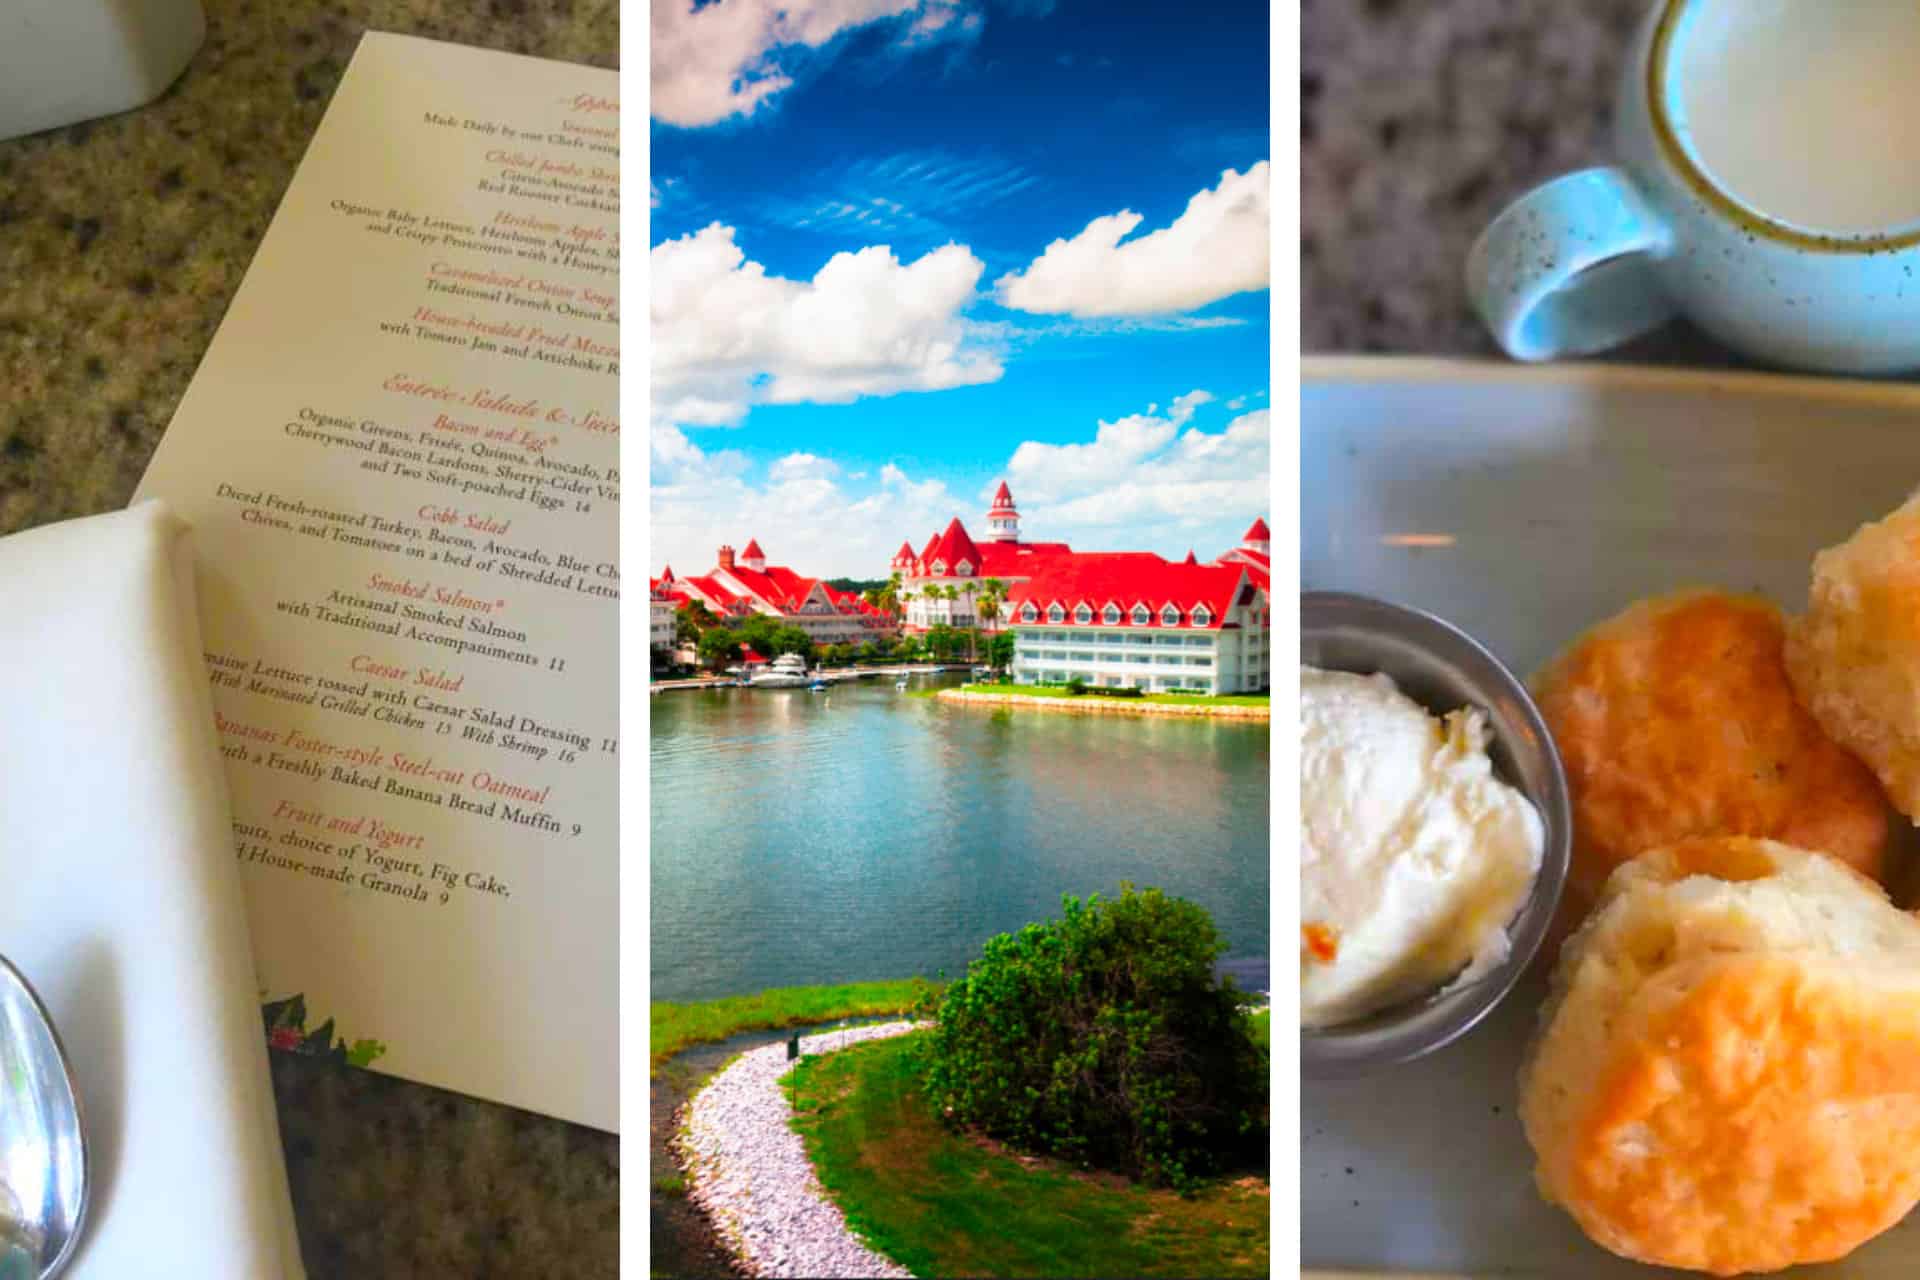 A breakfast spread on a table and an image of the Grand Floridian Resort with a deep blue sky, and a menu from the Grand Floridian Cafe